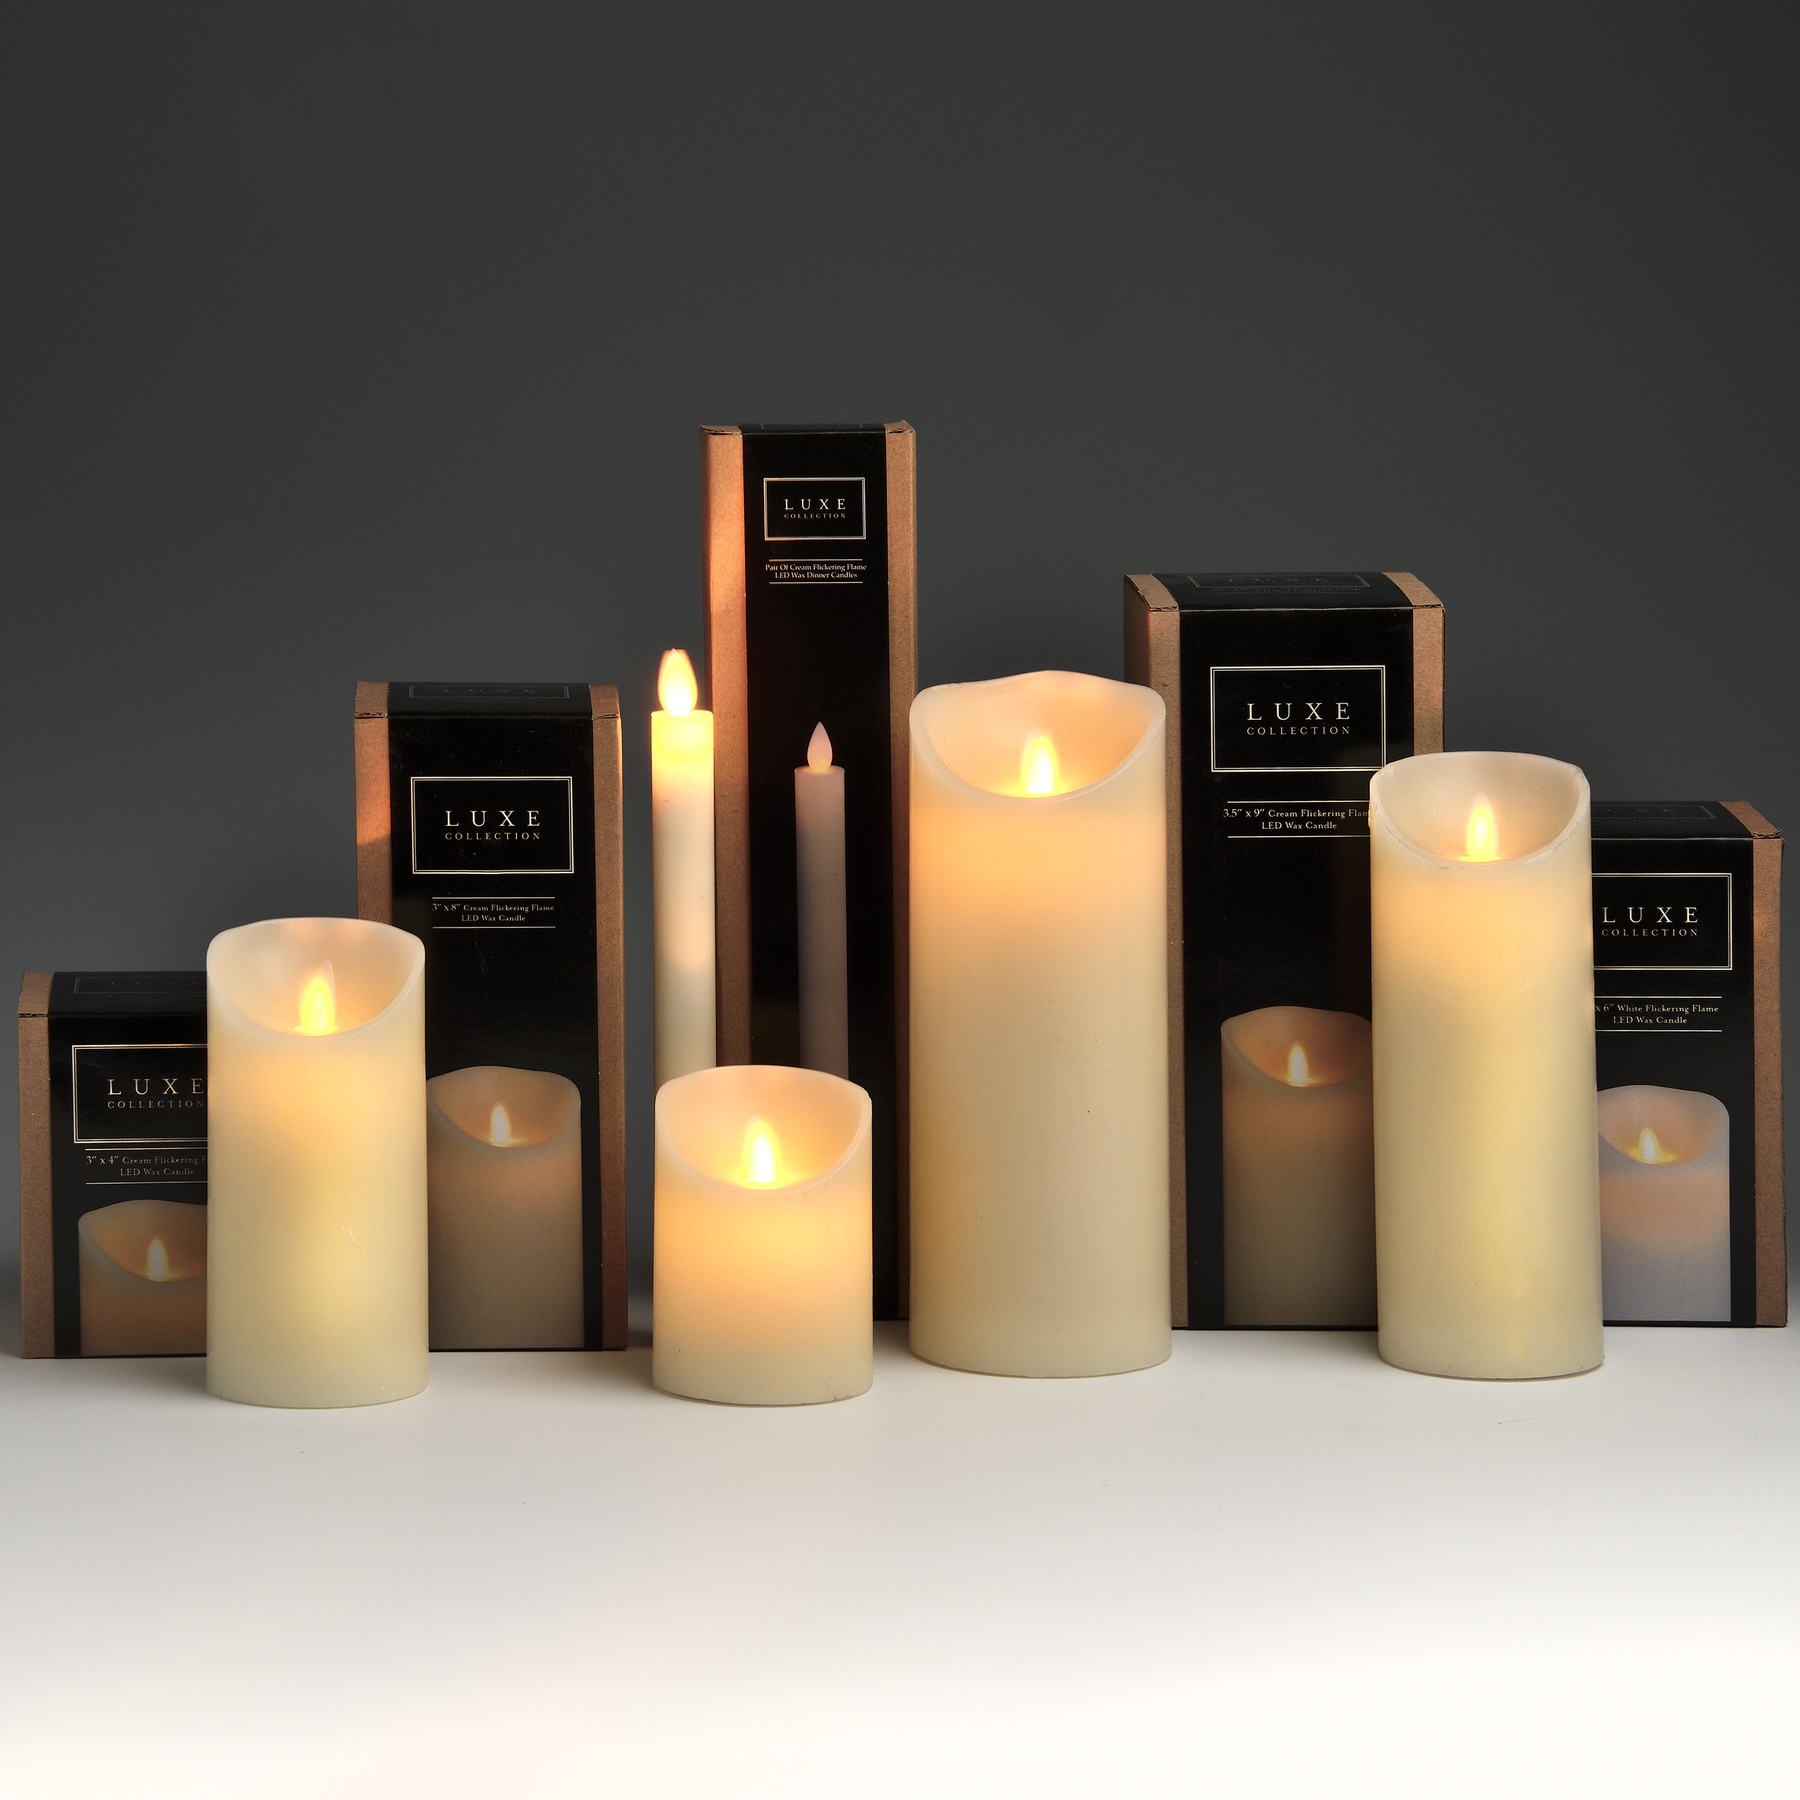 Pair Of Cream Luxe Flickering Flame LED Wax Dinner Candles - Image 5